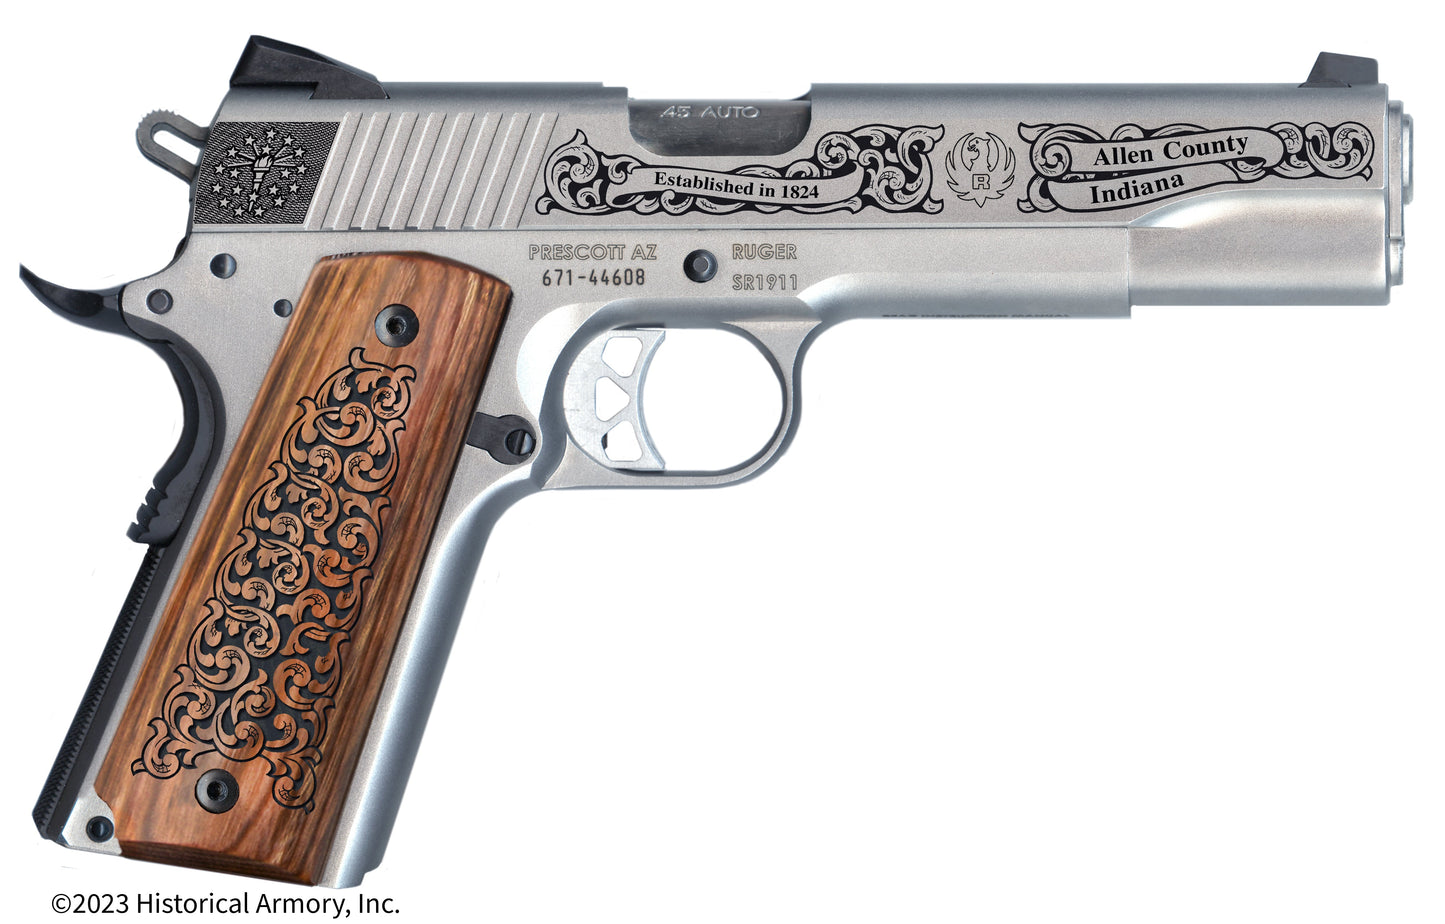 Allen County Indiana Engraved .45 Auto Ruger 1911